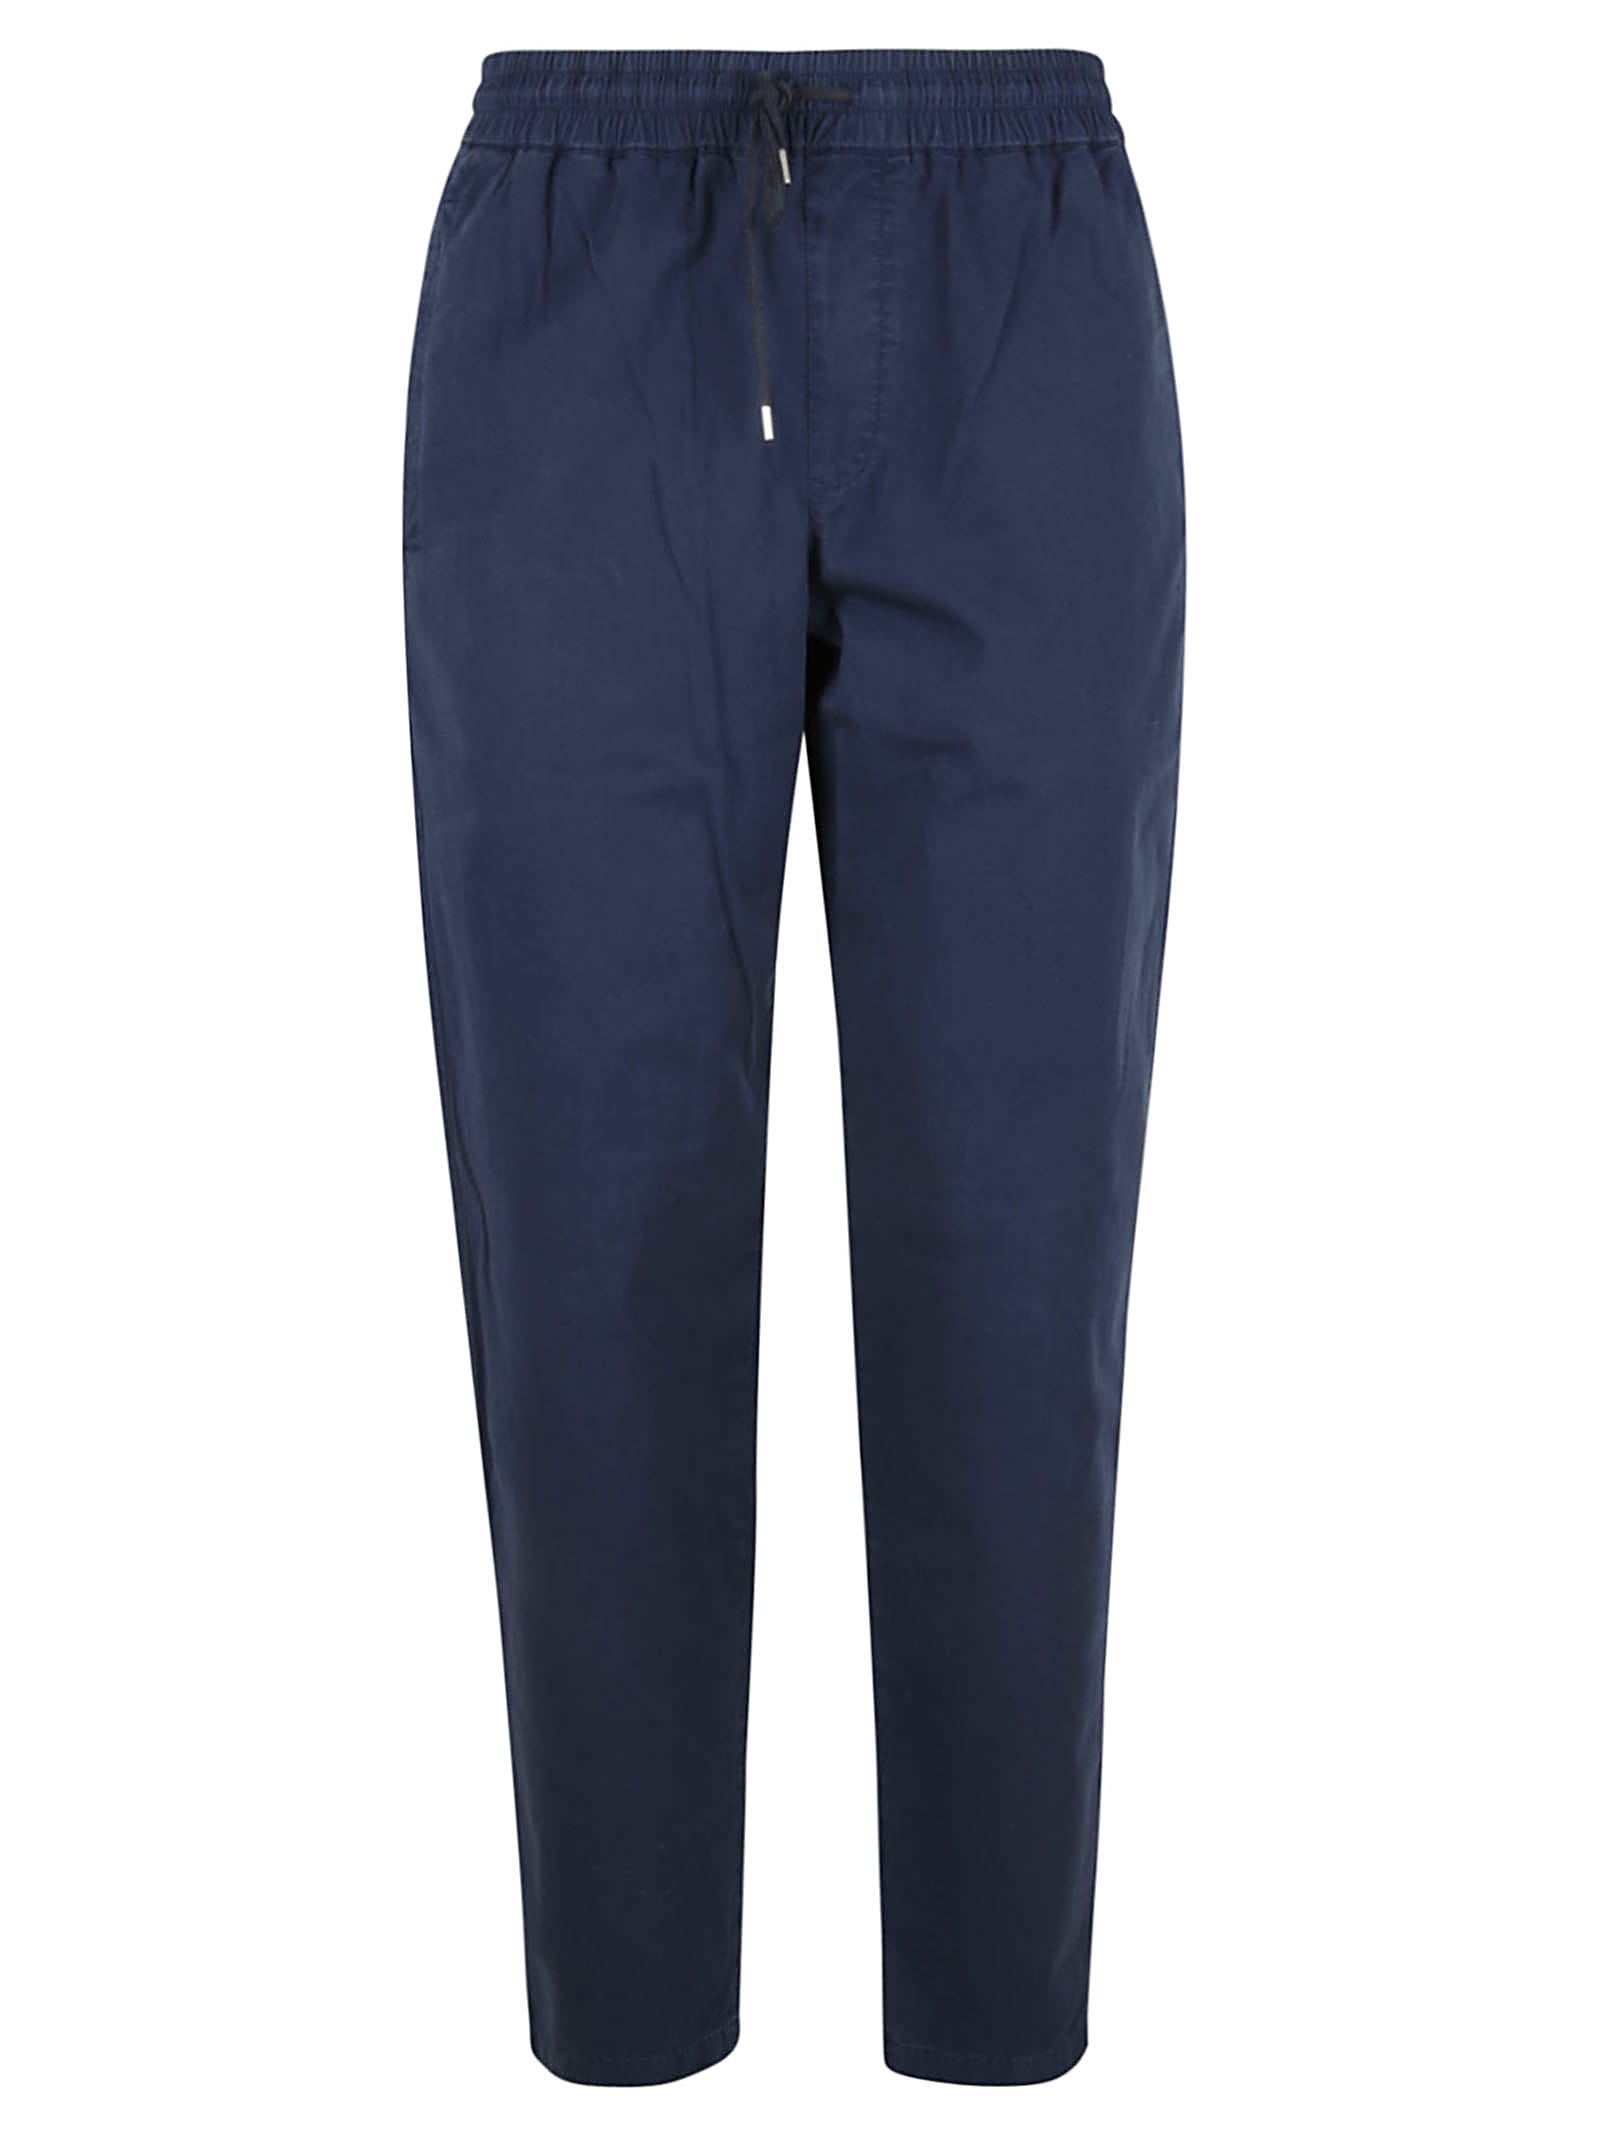 A.P.C. New Kaplan Trousers